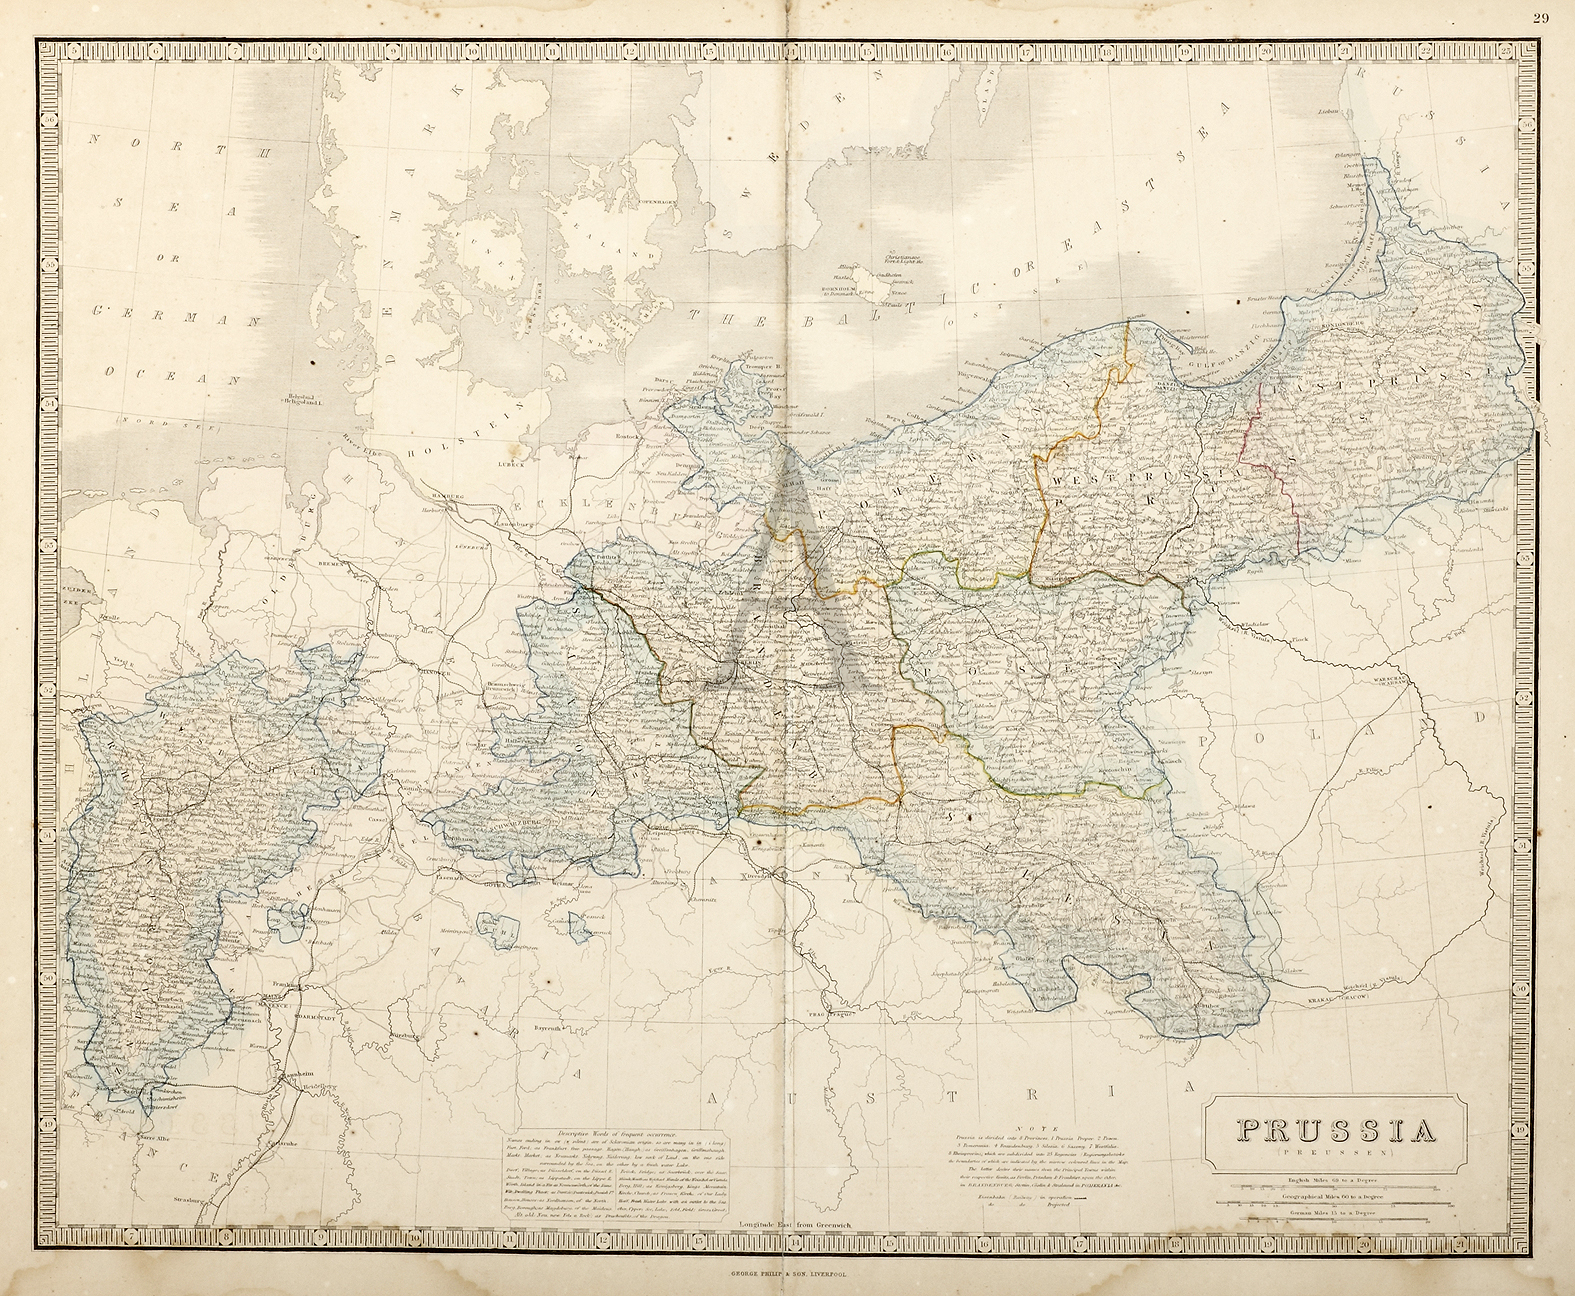 Prussia - Antique Map from 1860